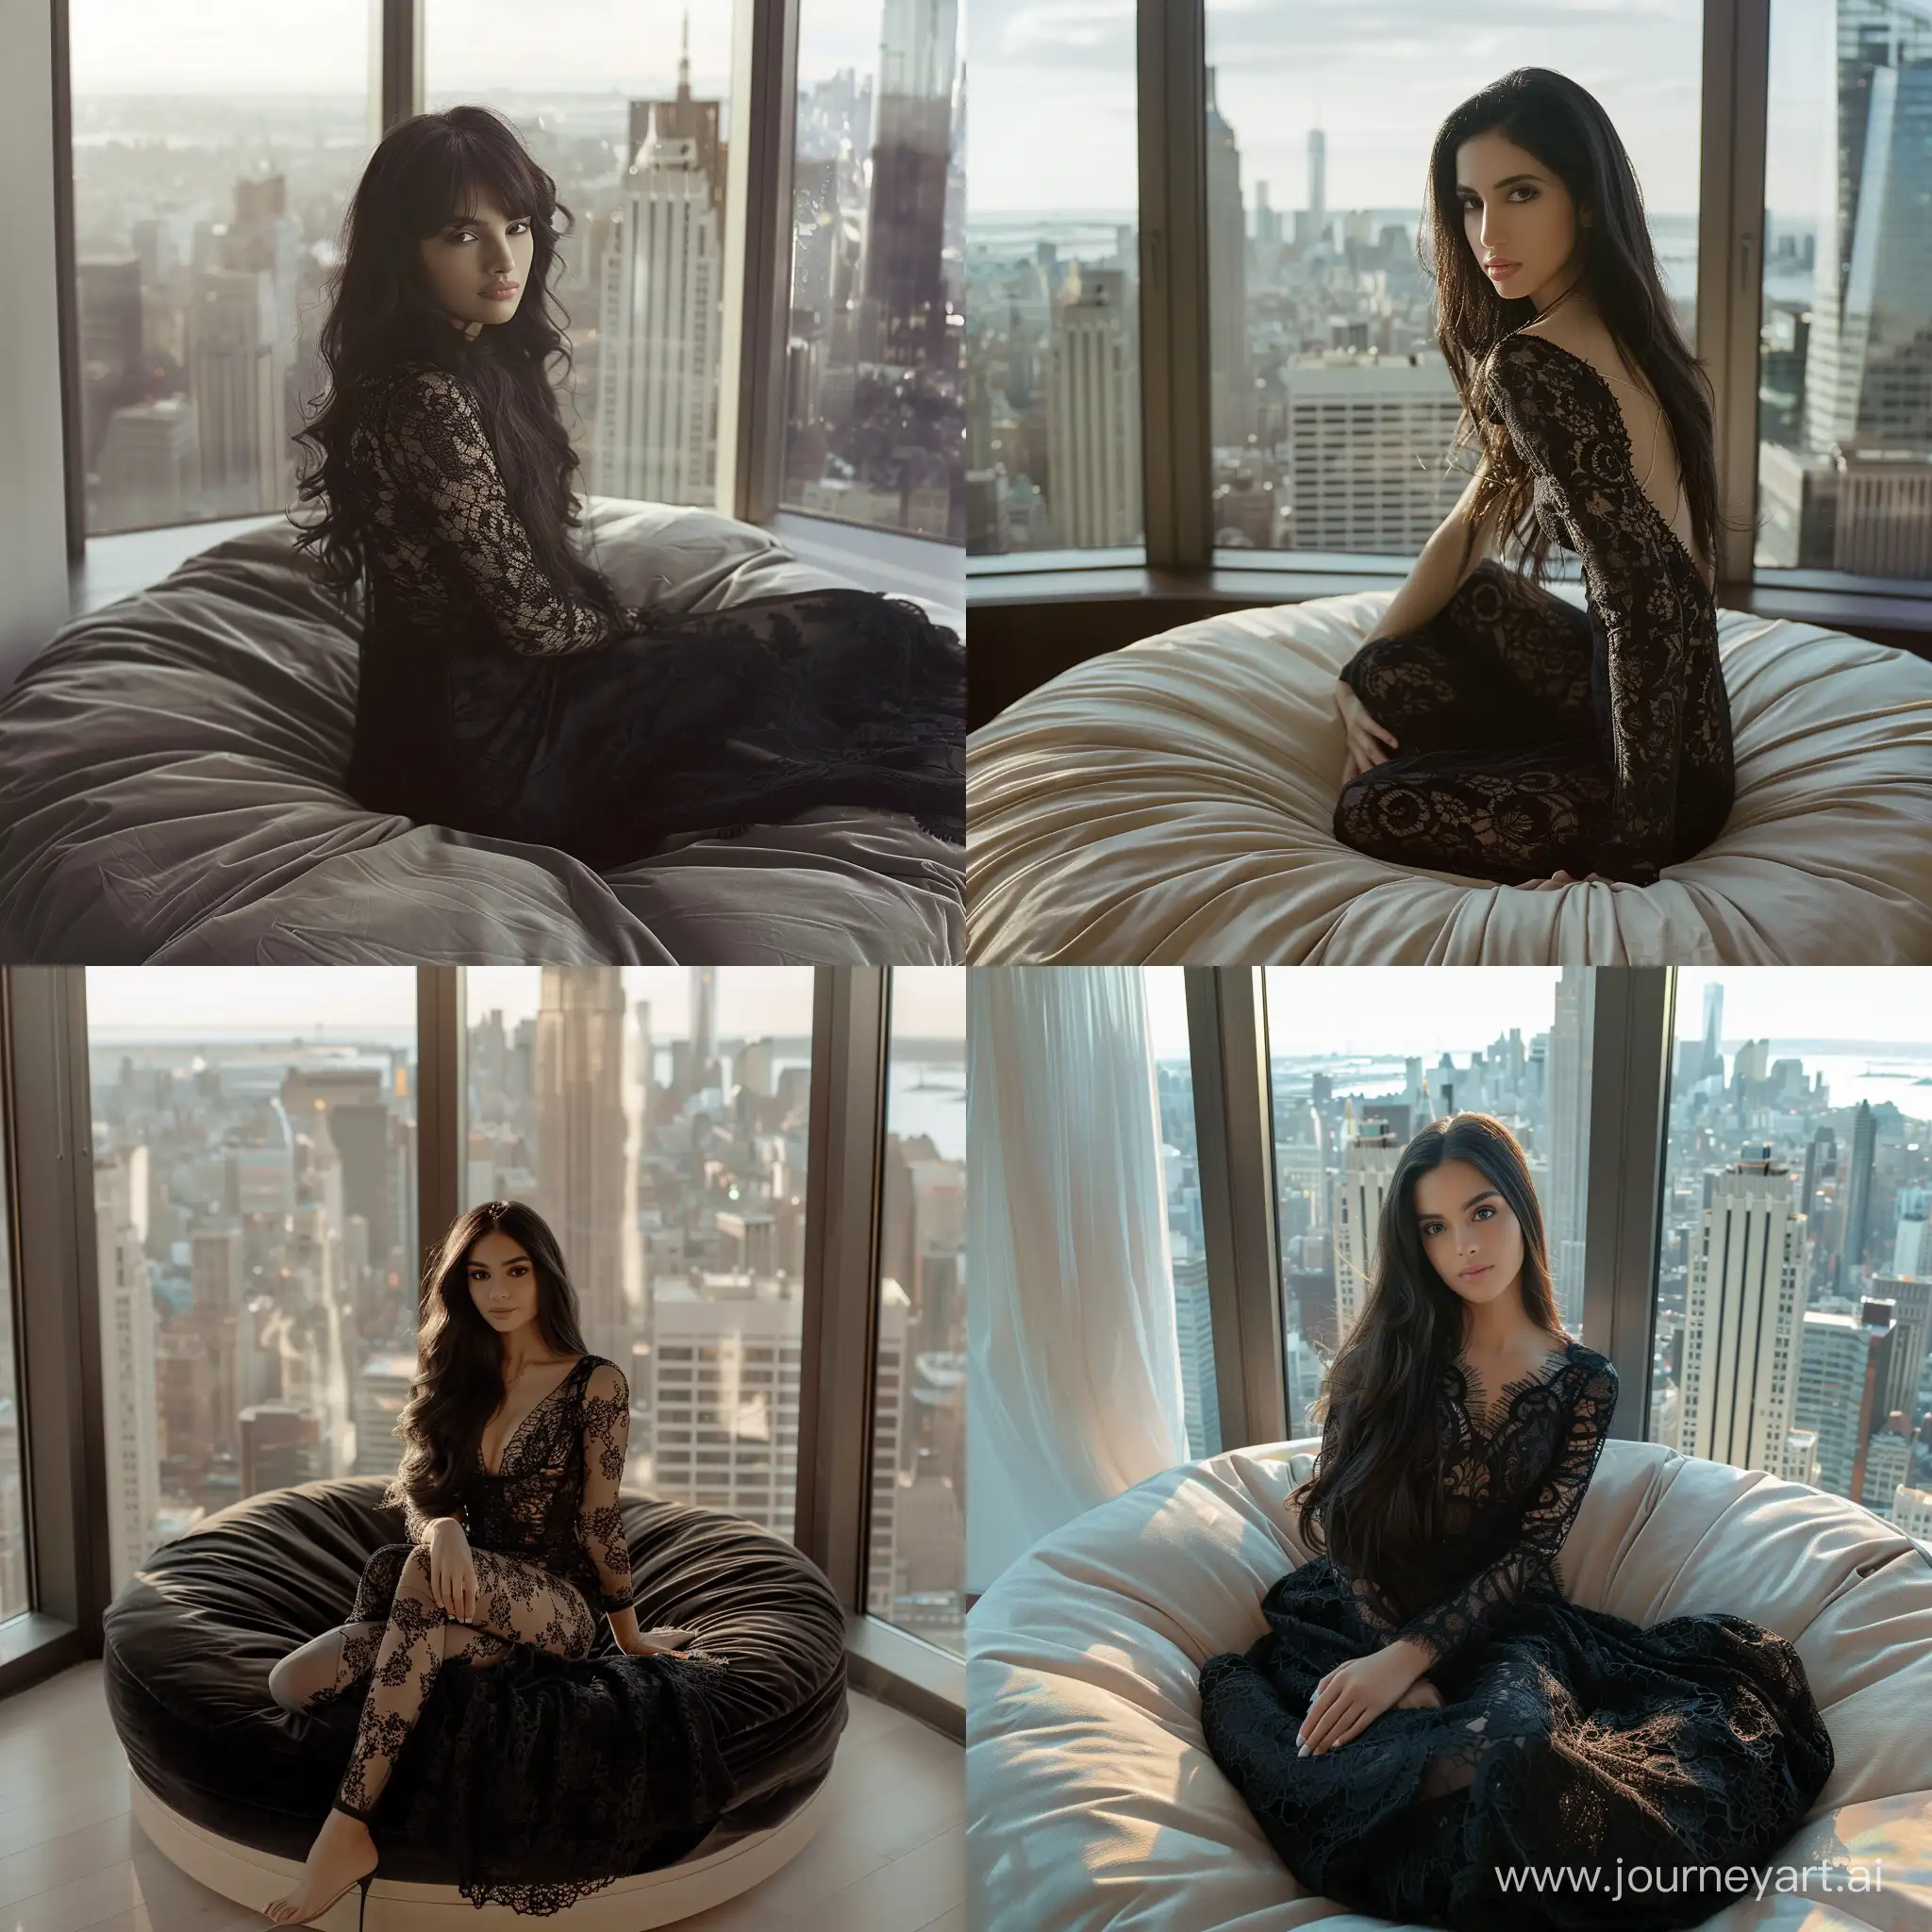 DarkHaired-Girl-in-Elegant-Lace-Dress-on-Round-Bed-Overlooking-New-York-City